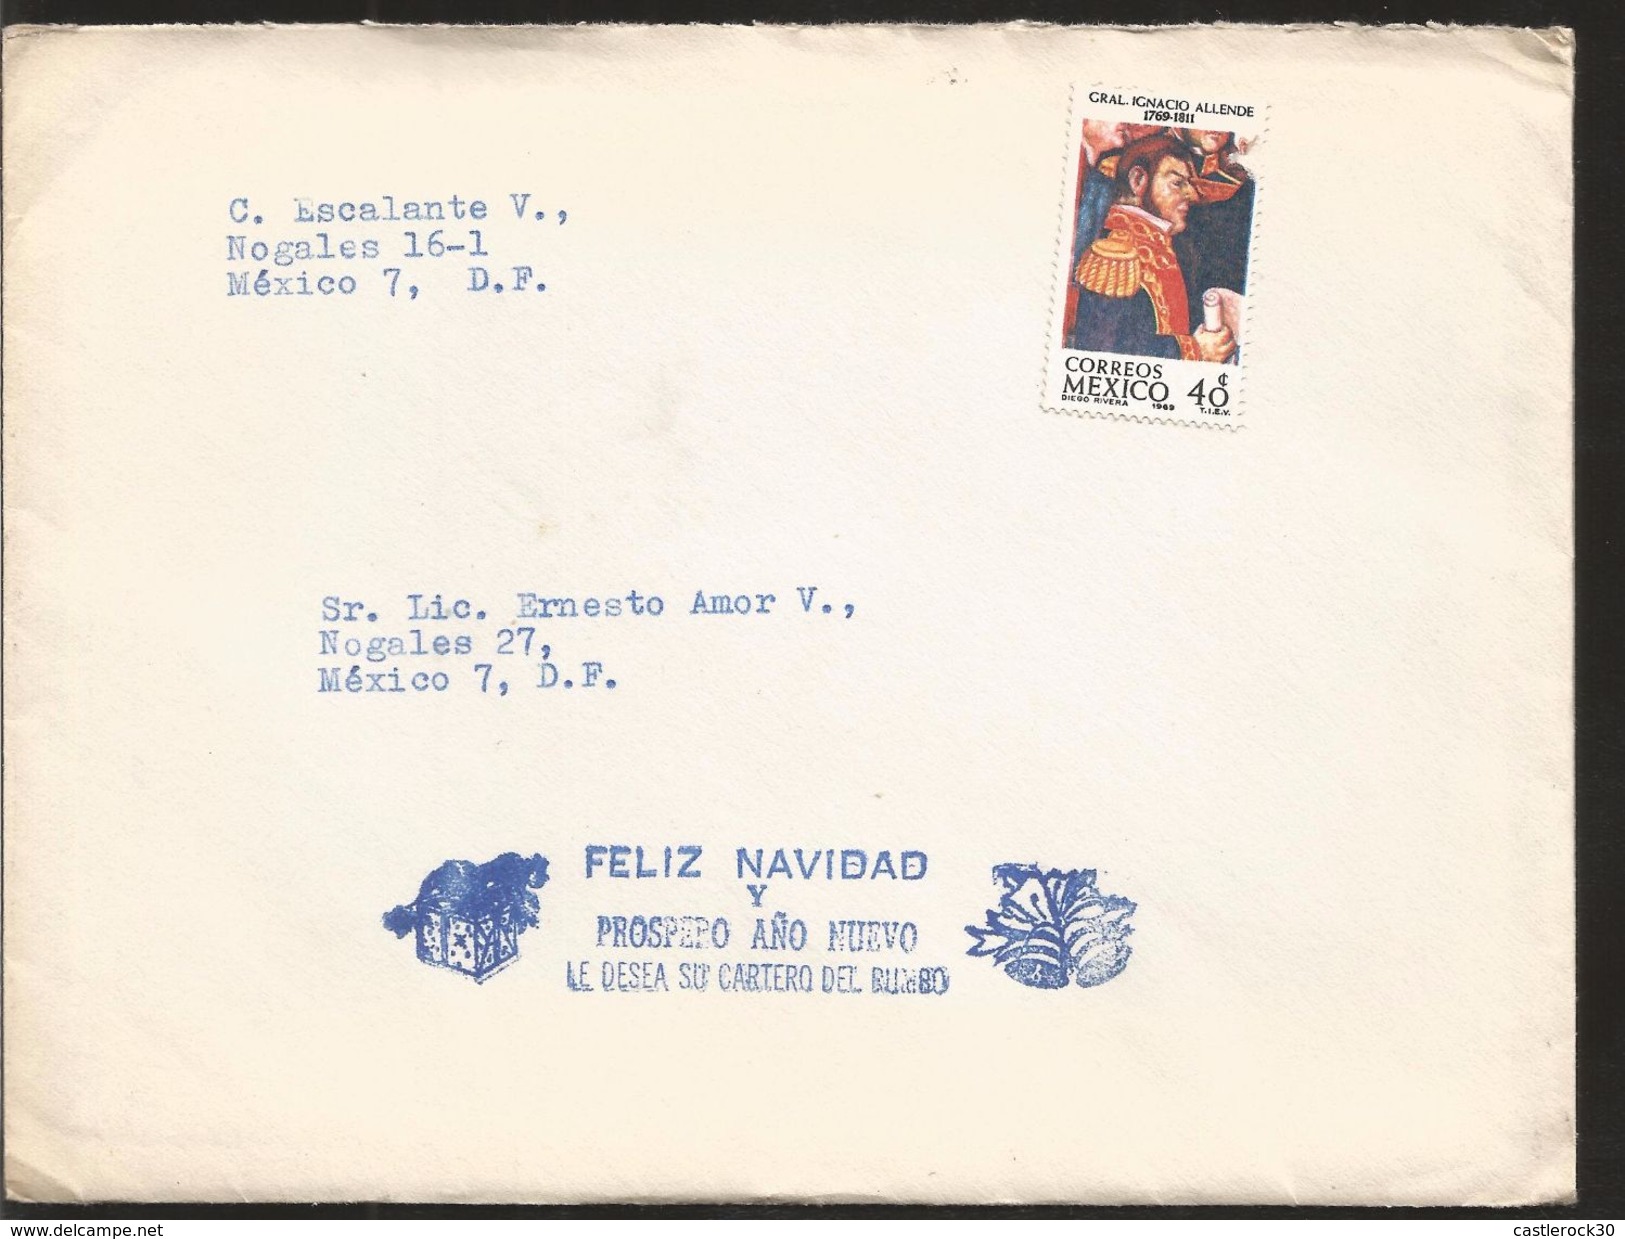 A) 1969 MEXICO, GRAL IGNACIO ALLENDE, CONMEMORATIVE STAMP, GOOD CHRISTMAS WISHES, LETTER INSIDE, CIRCULATED COVER IN MEX - Mexico